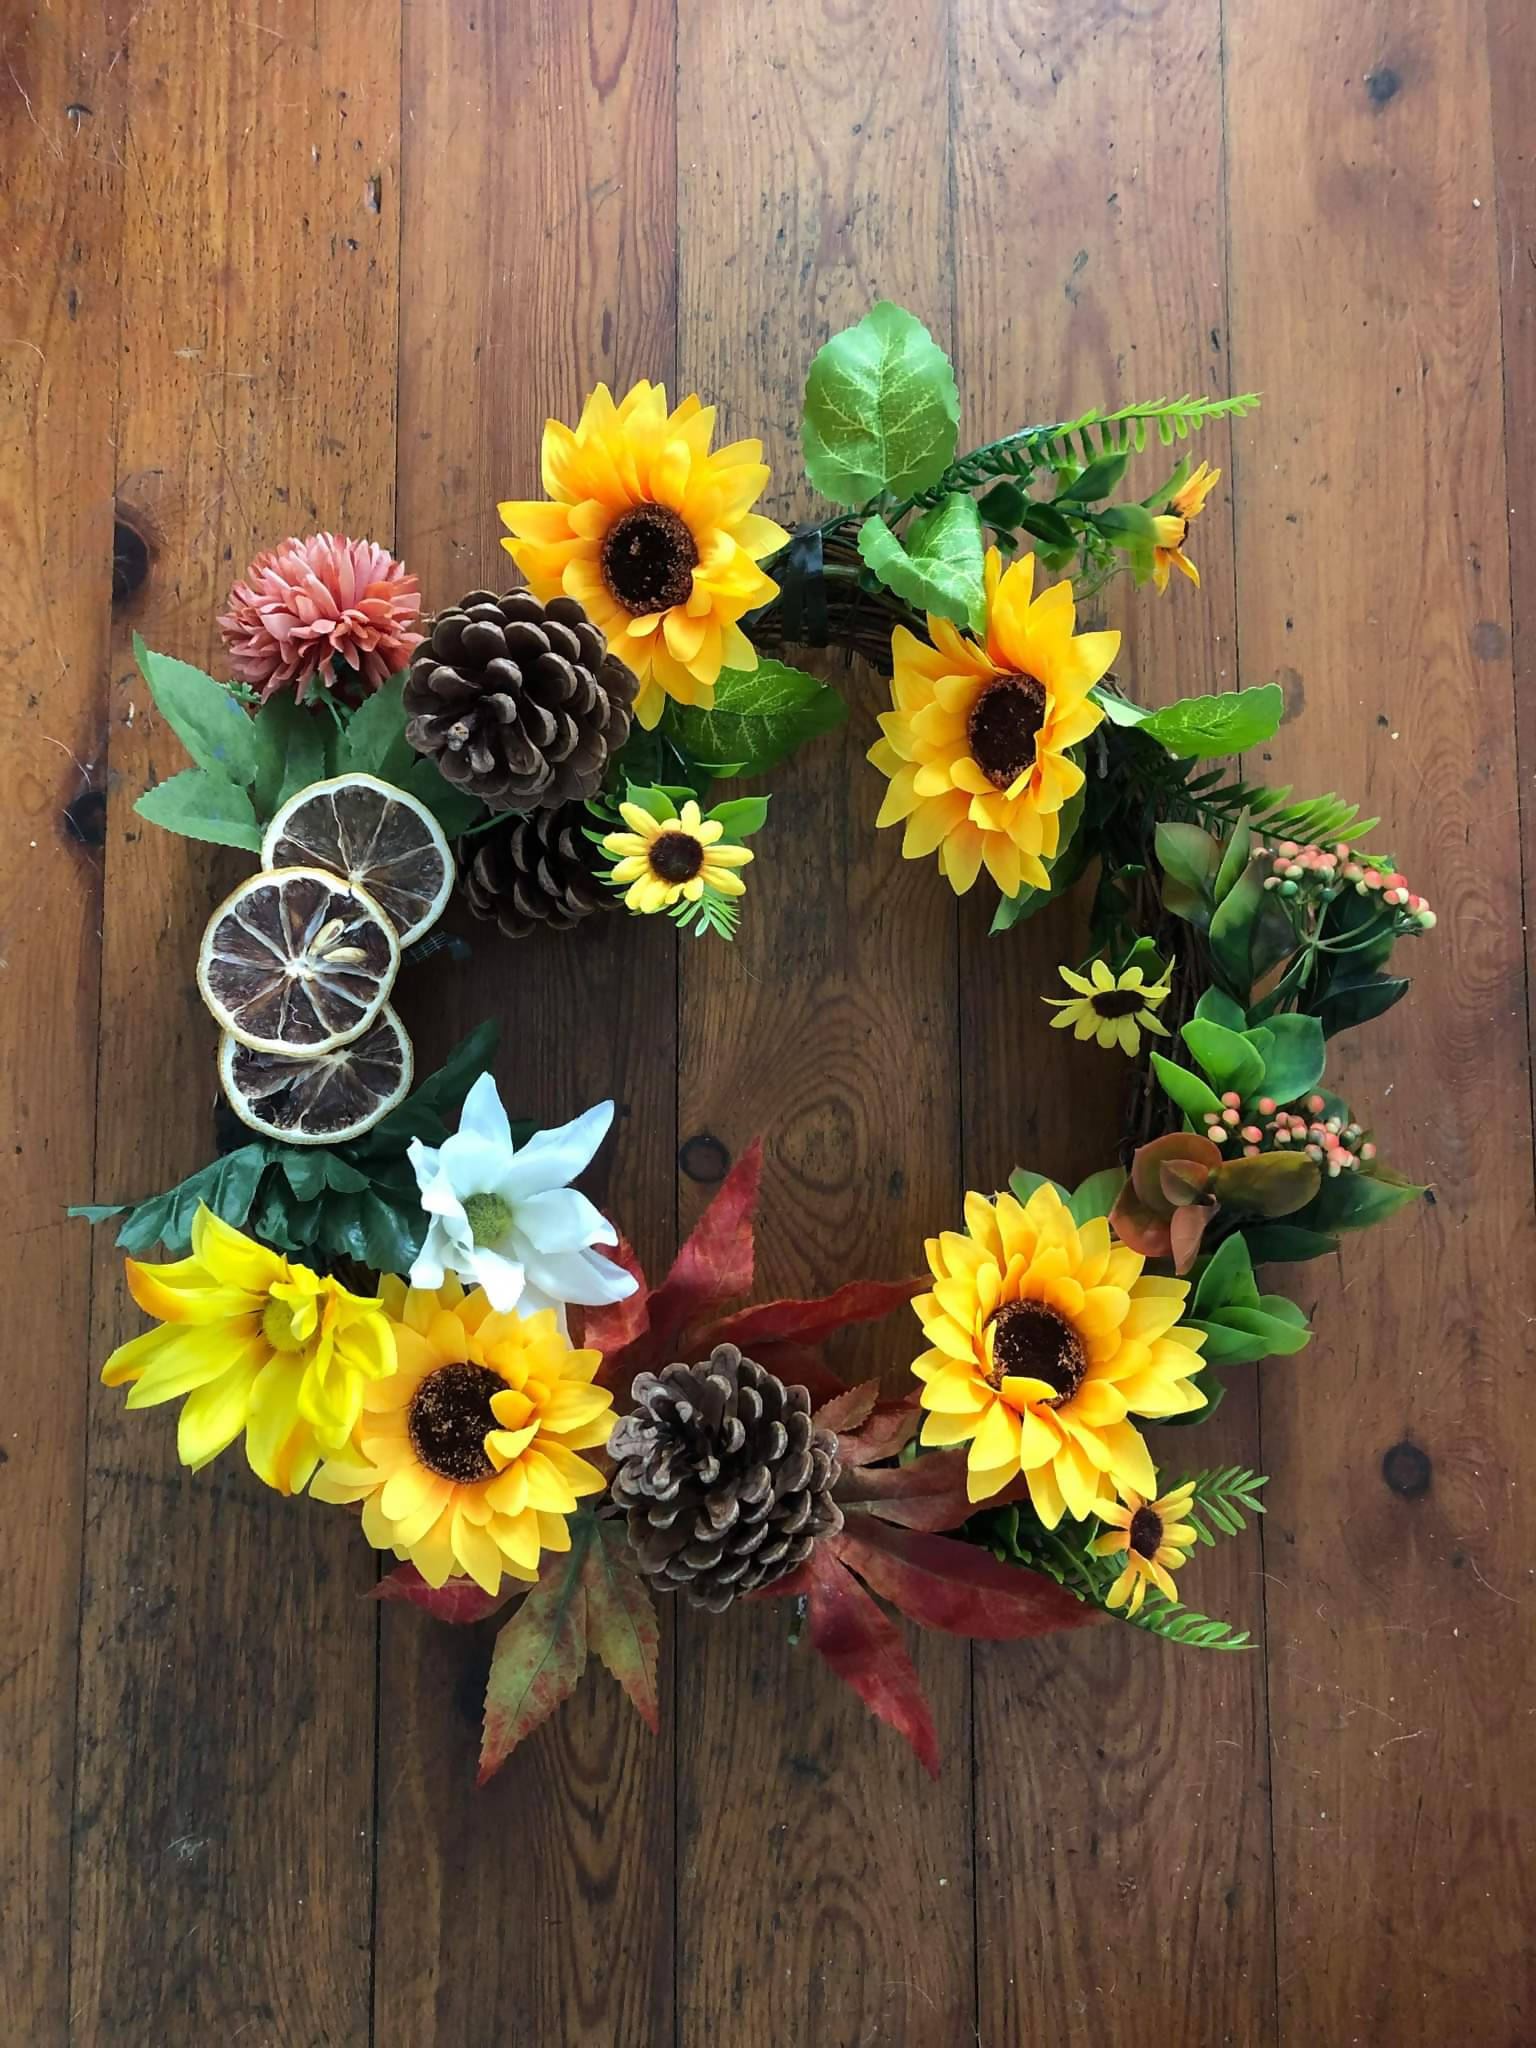 Autumnal wreath with sunflowers